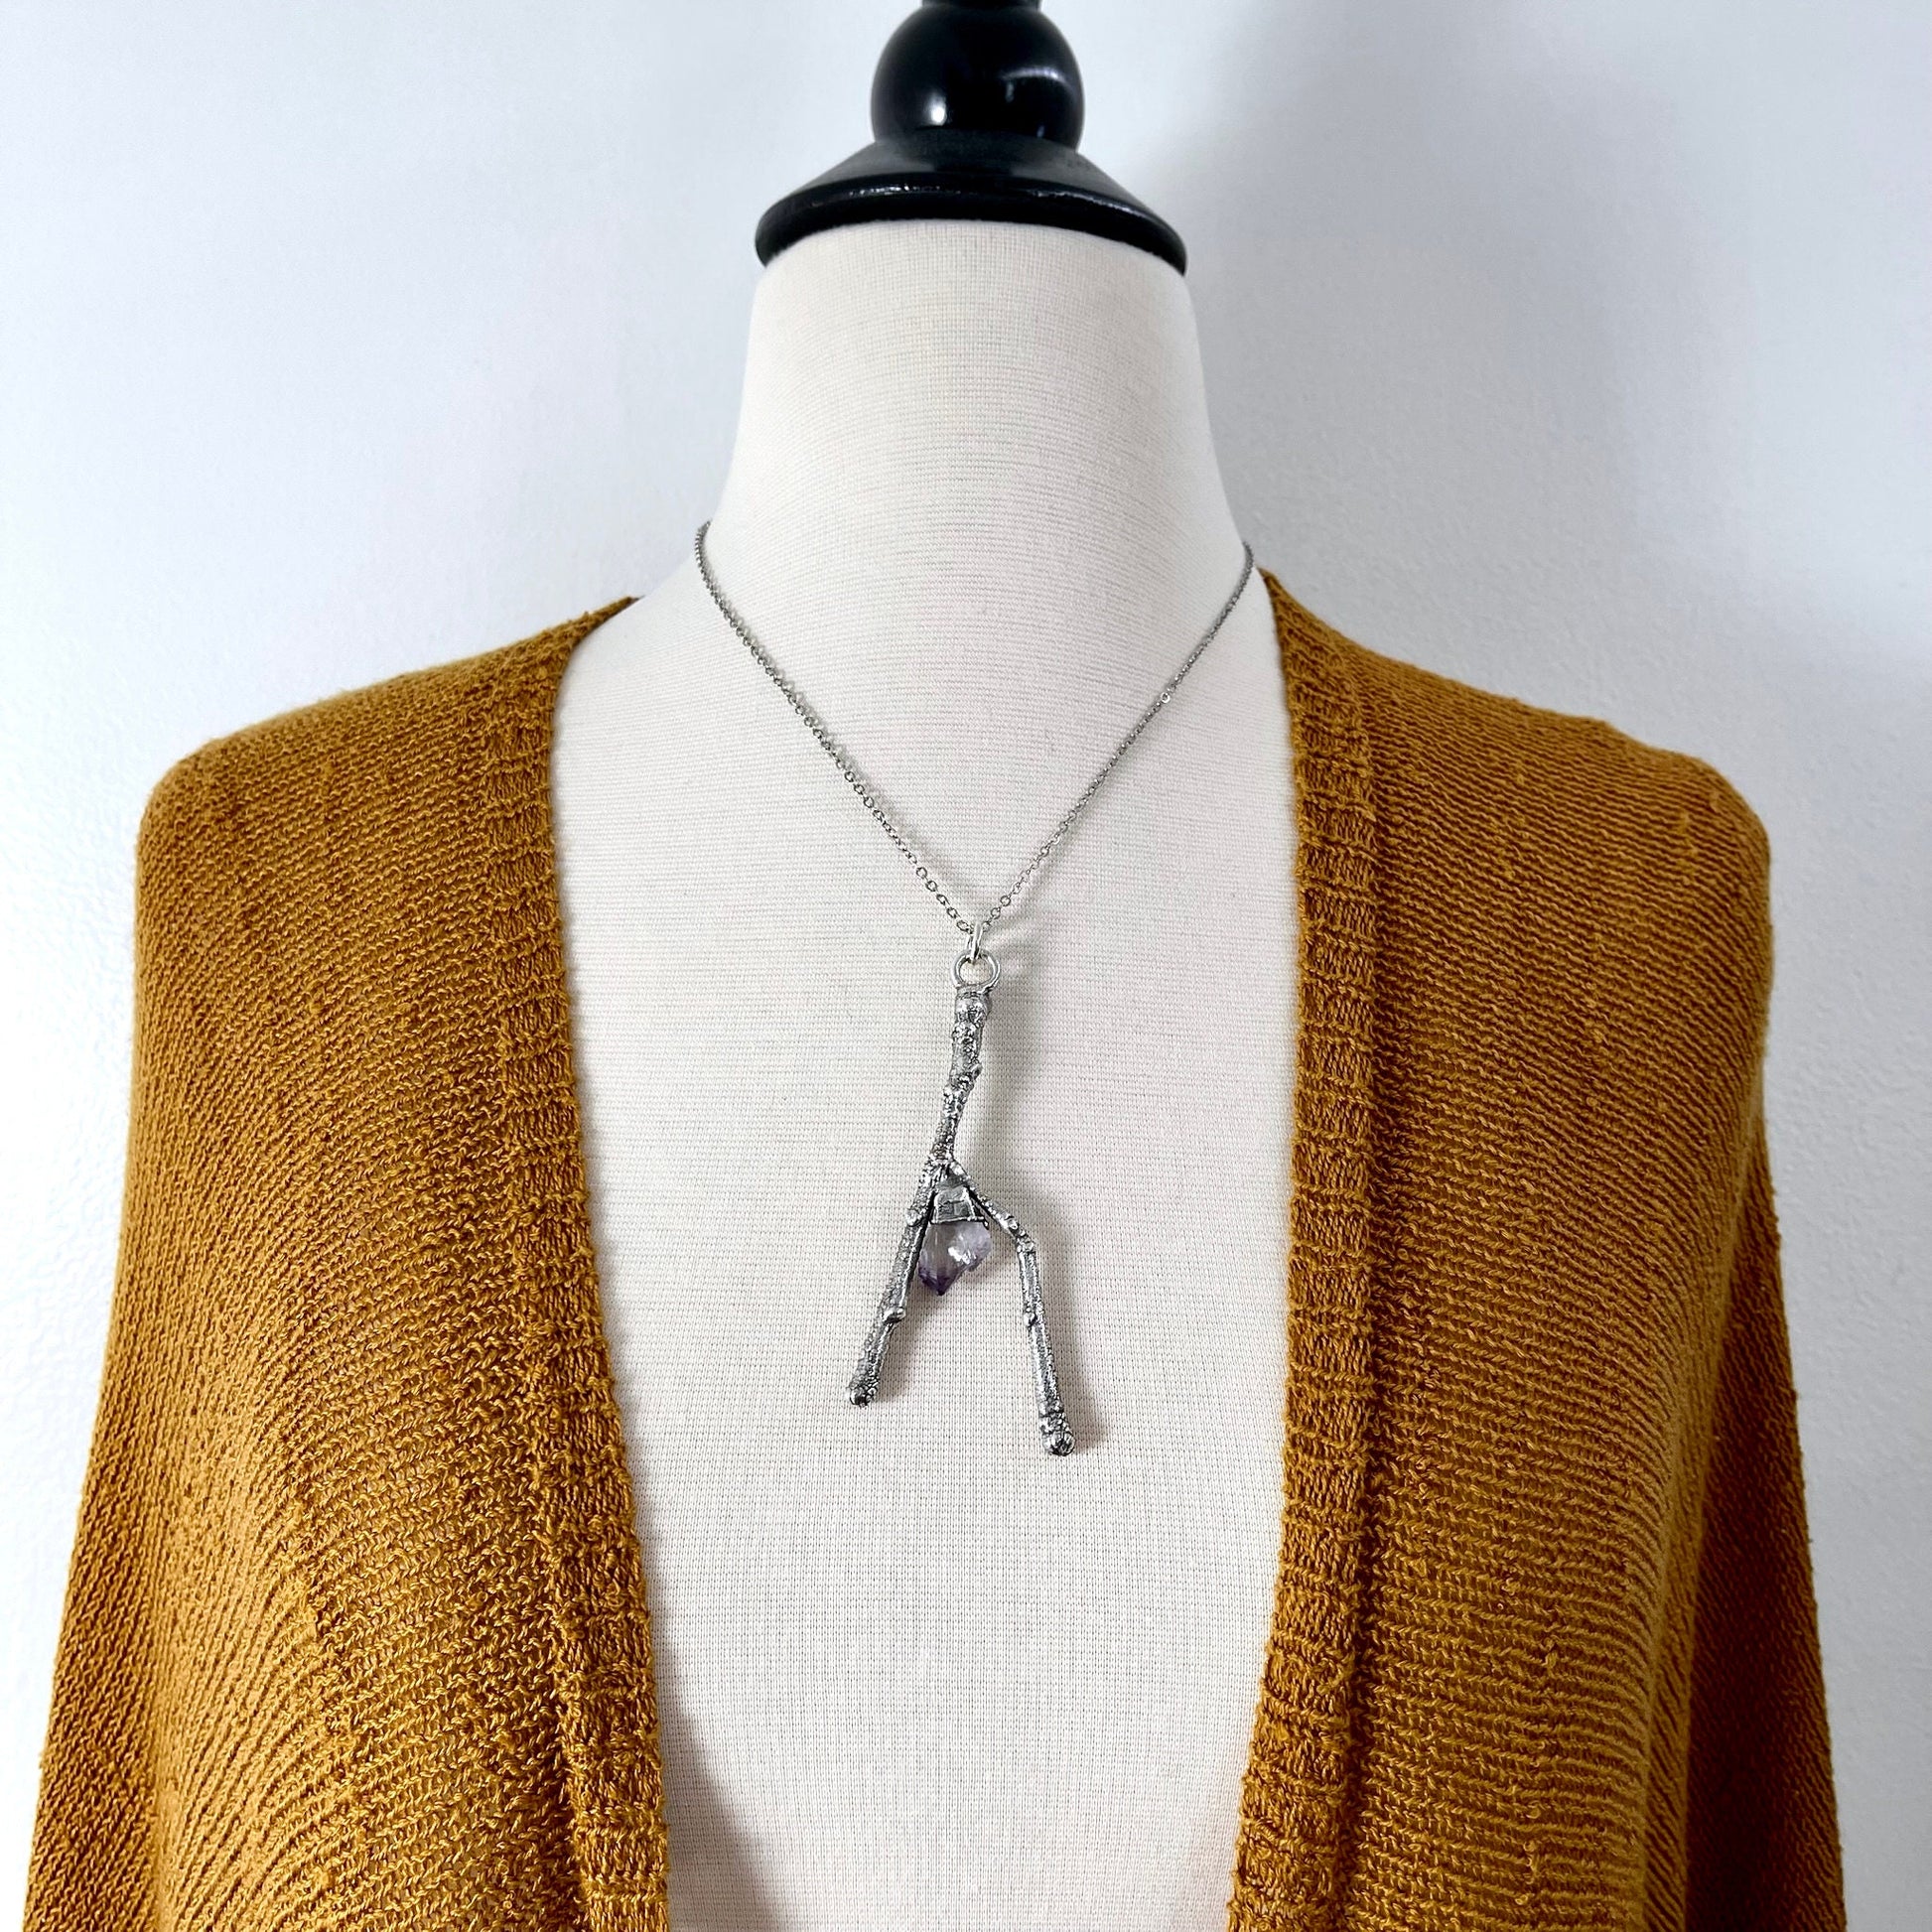 big crystal Necklace, Big Gothic Necklace, Bohemian Jewelry, Crystal Necklaces, Crystal Pendant, Etsy ID: 1587030930, FOXLARK- NECKLACES, Jewelry, nature inspired, Necklaces, Silver Jewelry, Silver Necklace, Silver Stone Jewelry, Statement Necklace, Stone